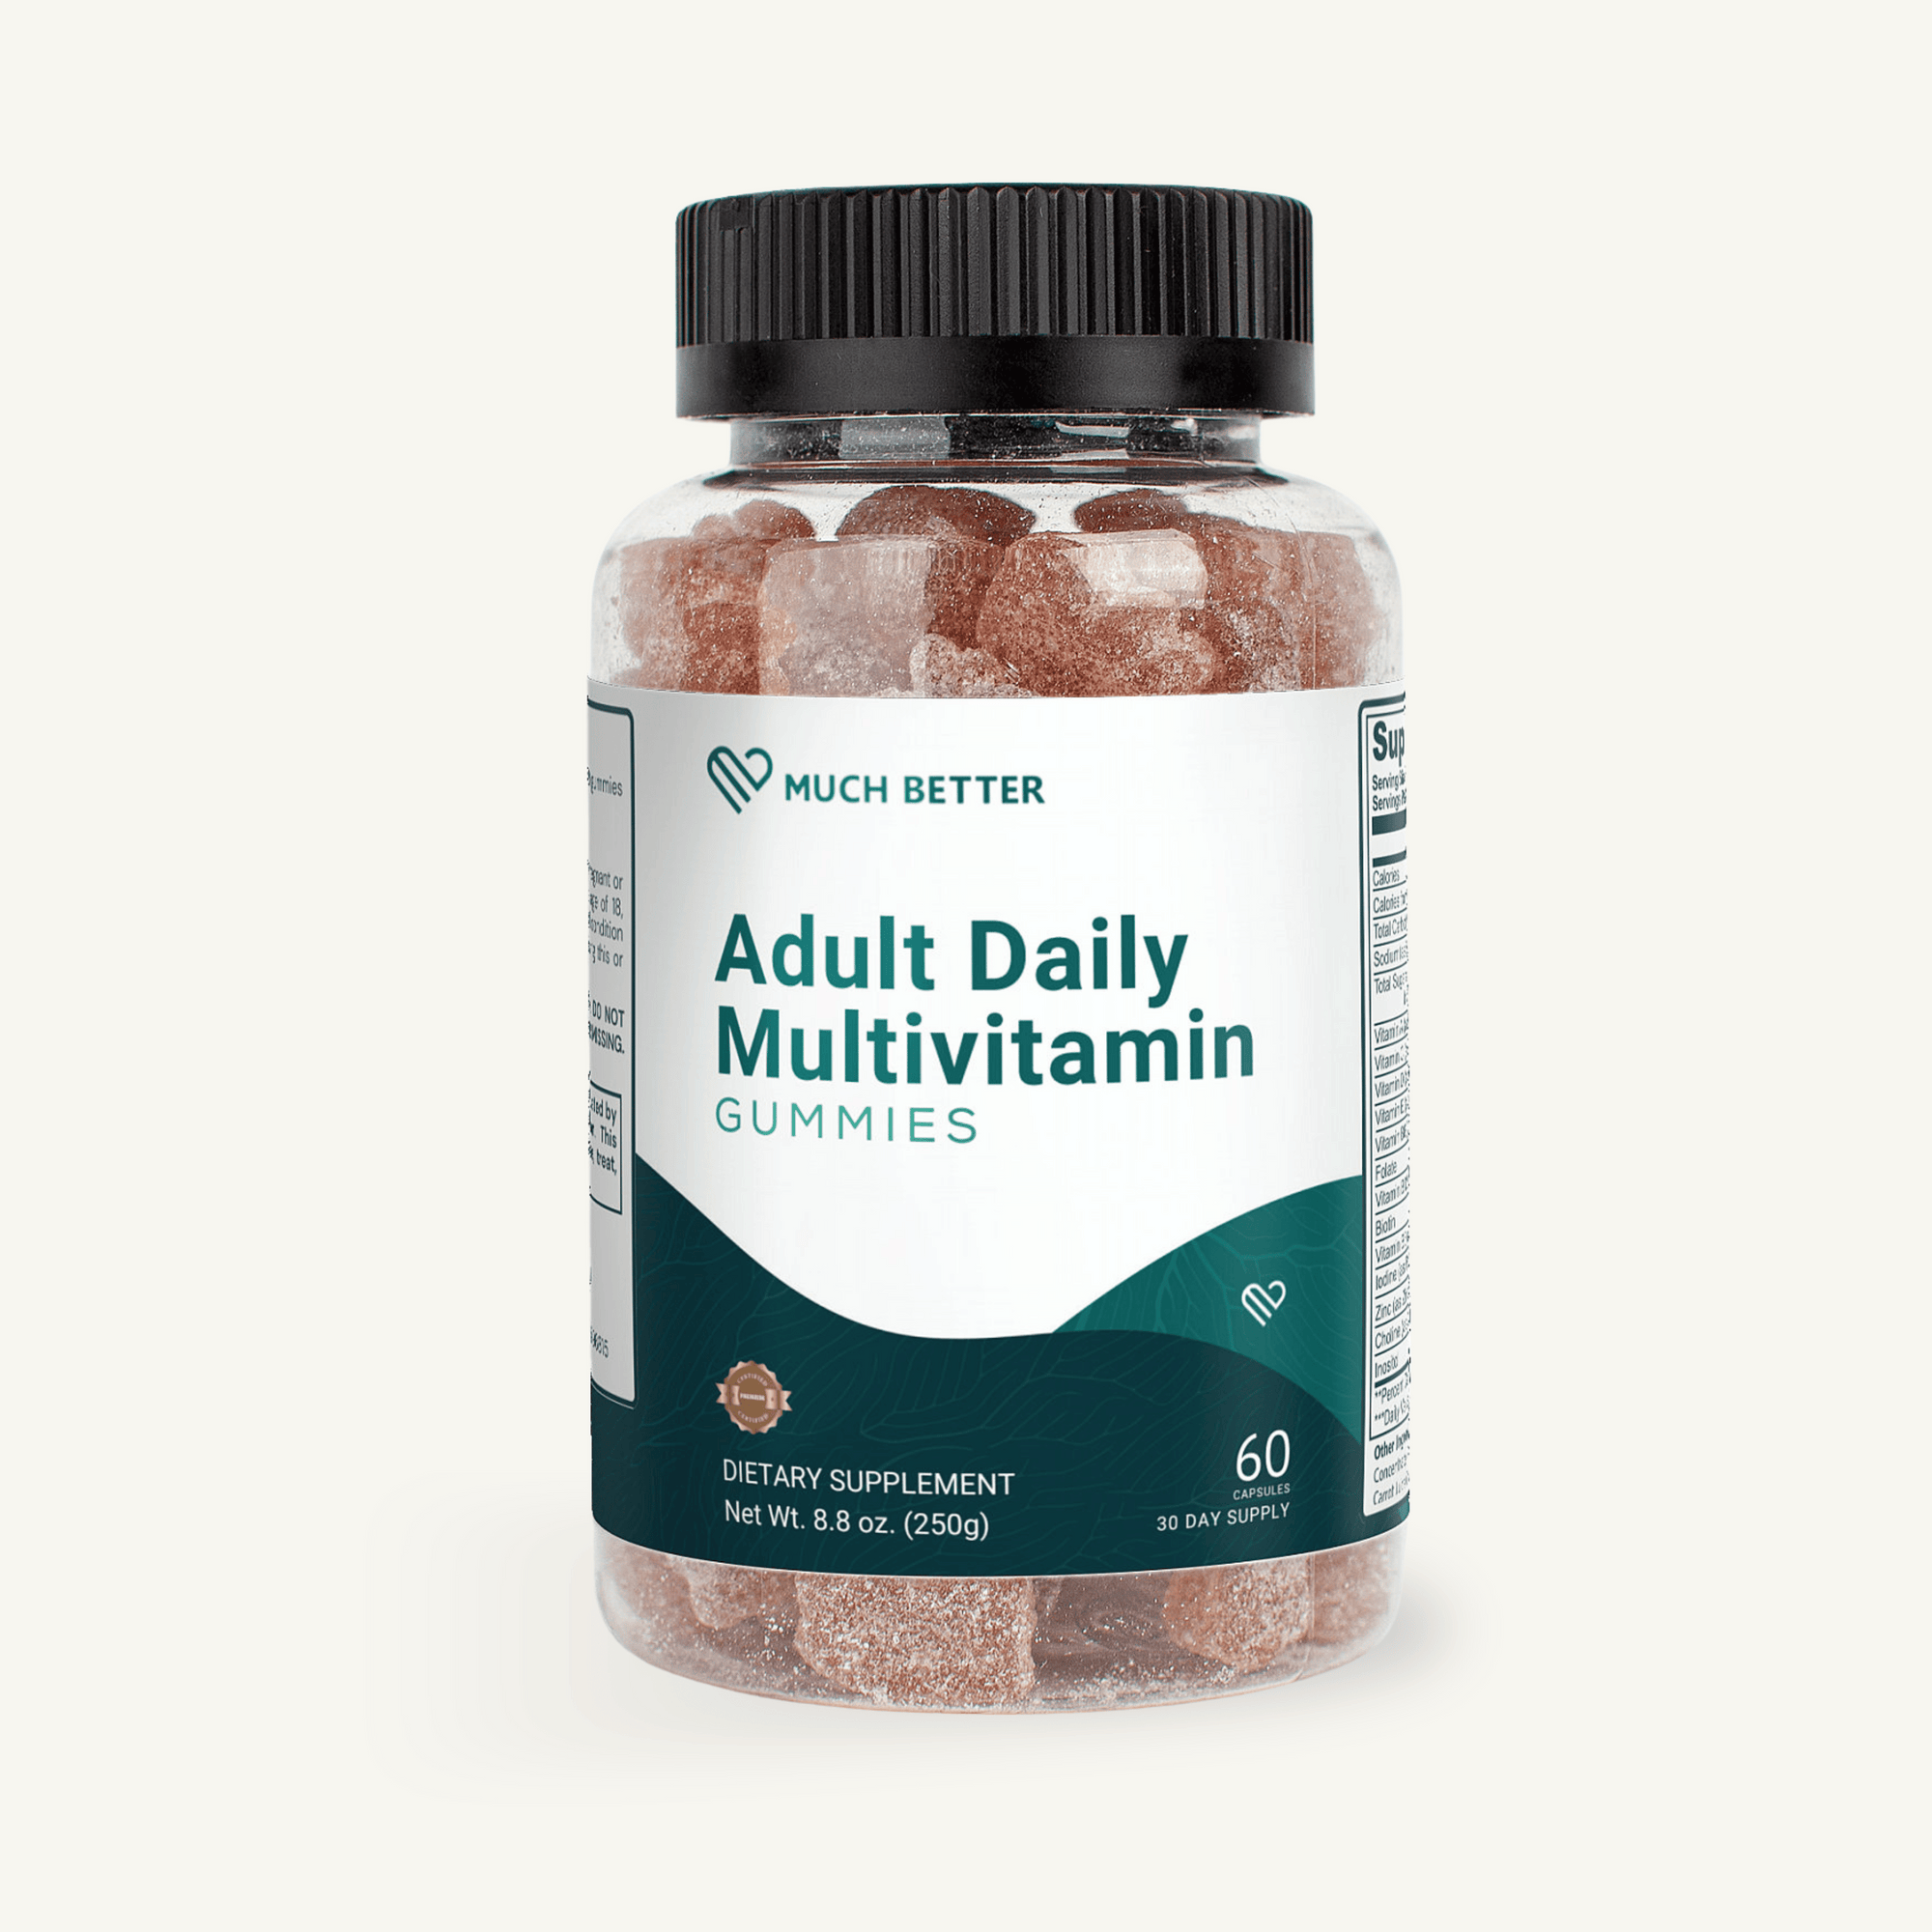 Adult Daily Multivitamin